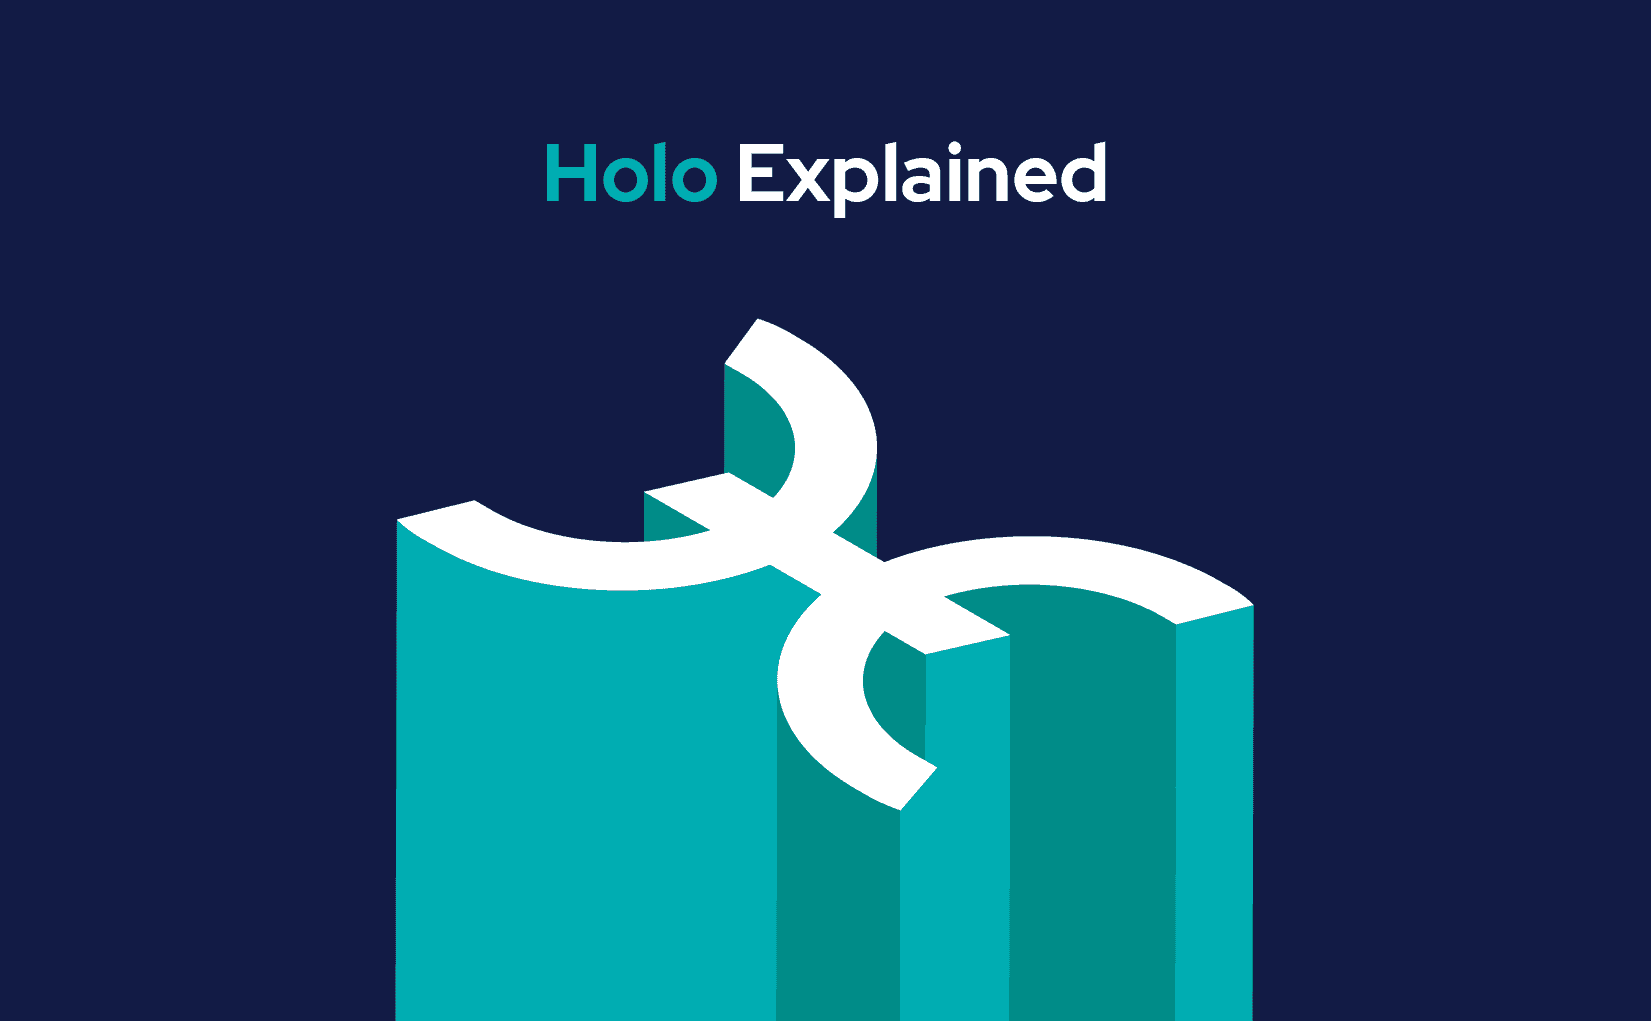 What is Holo